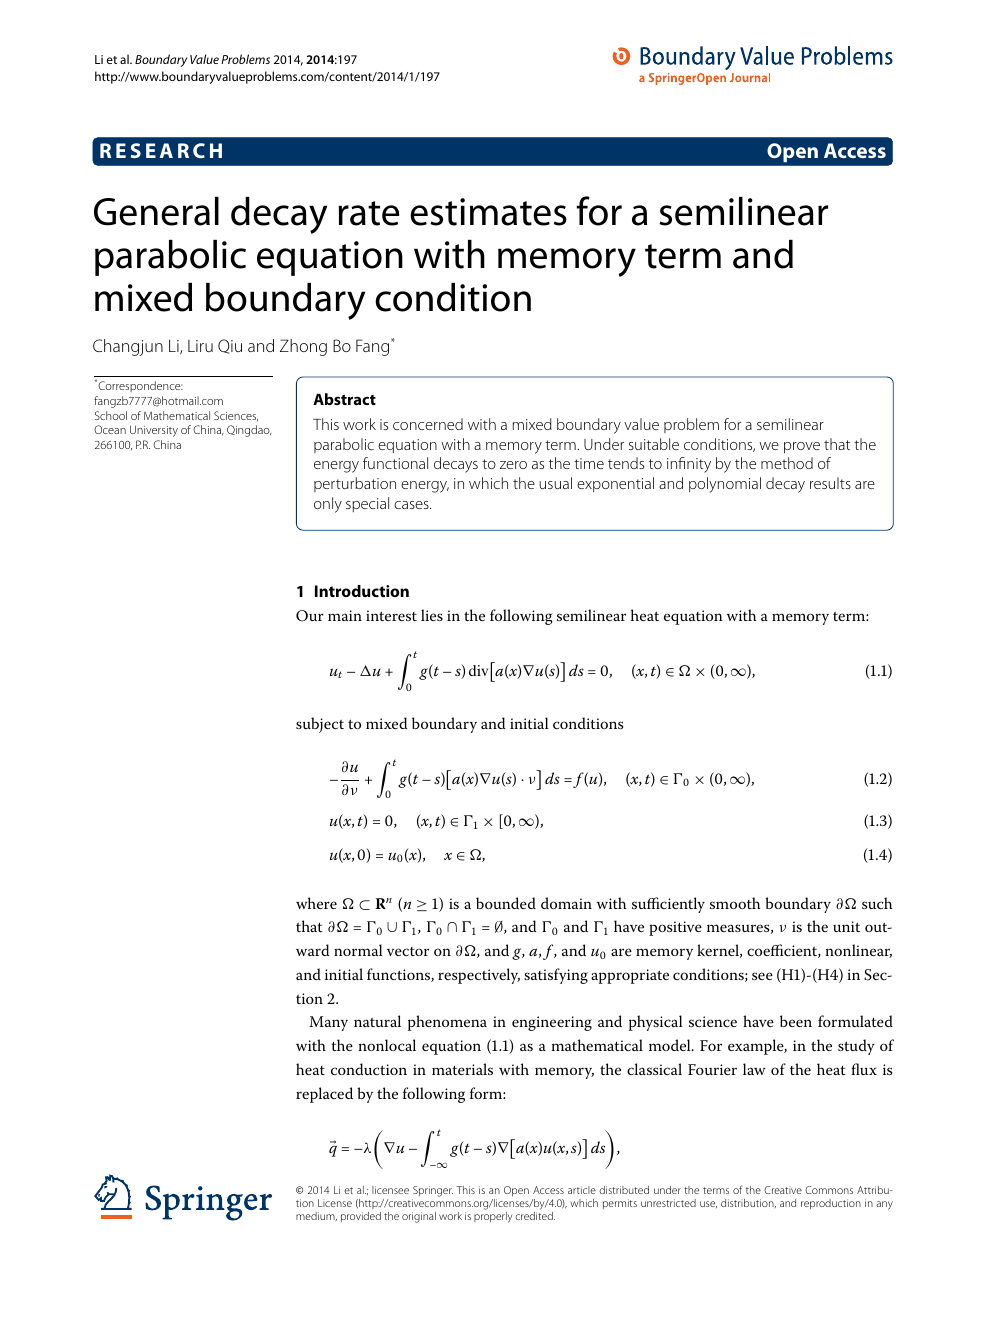 General Decay Rate Estimates For A Semilinear Parabolic Equation With Memory Term And Mixed Boundary Condition Topic Of Research Paper In Mathematics Download Scholarly Article Pdf And Read For Free On